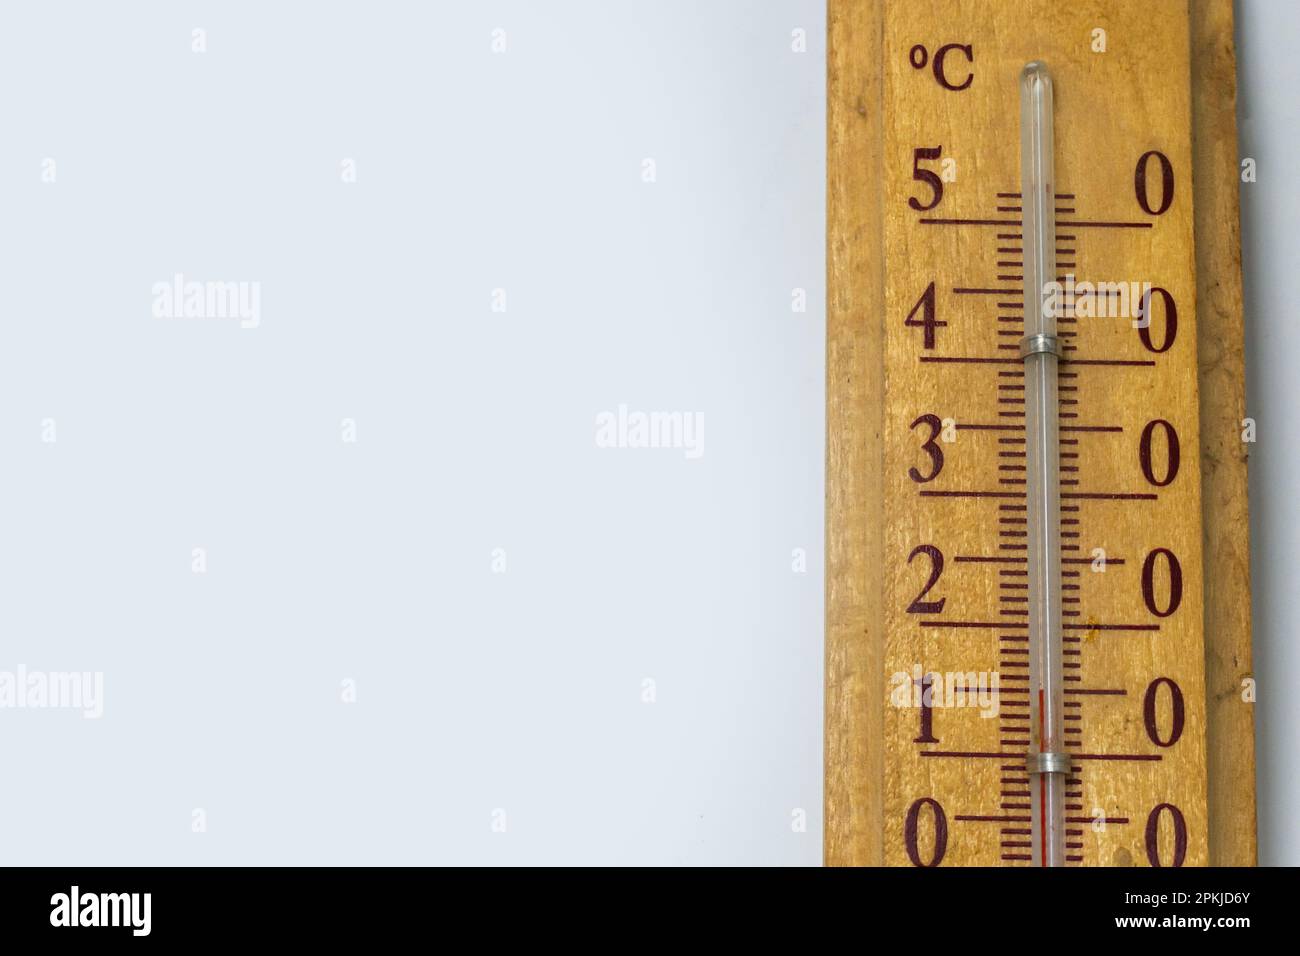 room thermometer on a wooden base close up on a white background. Celsius degree scale. Stock Photo